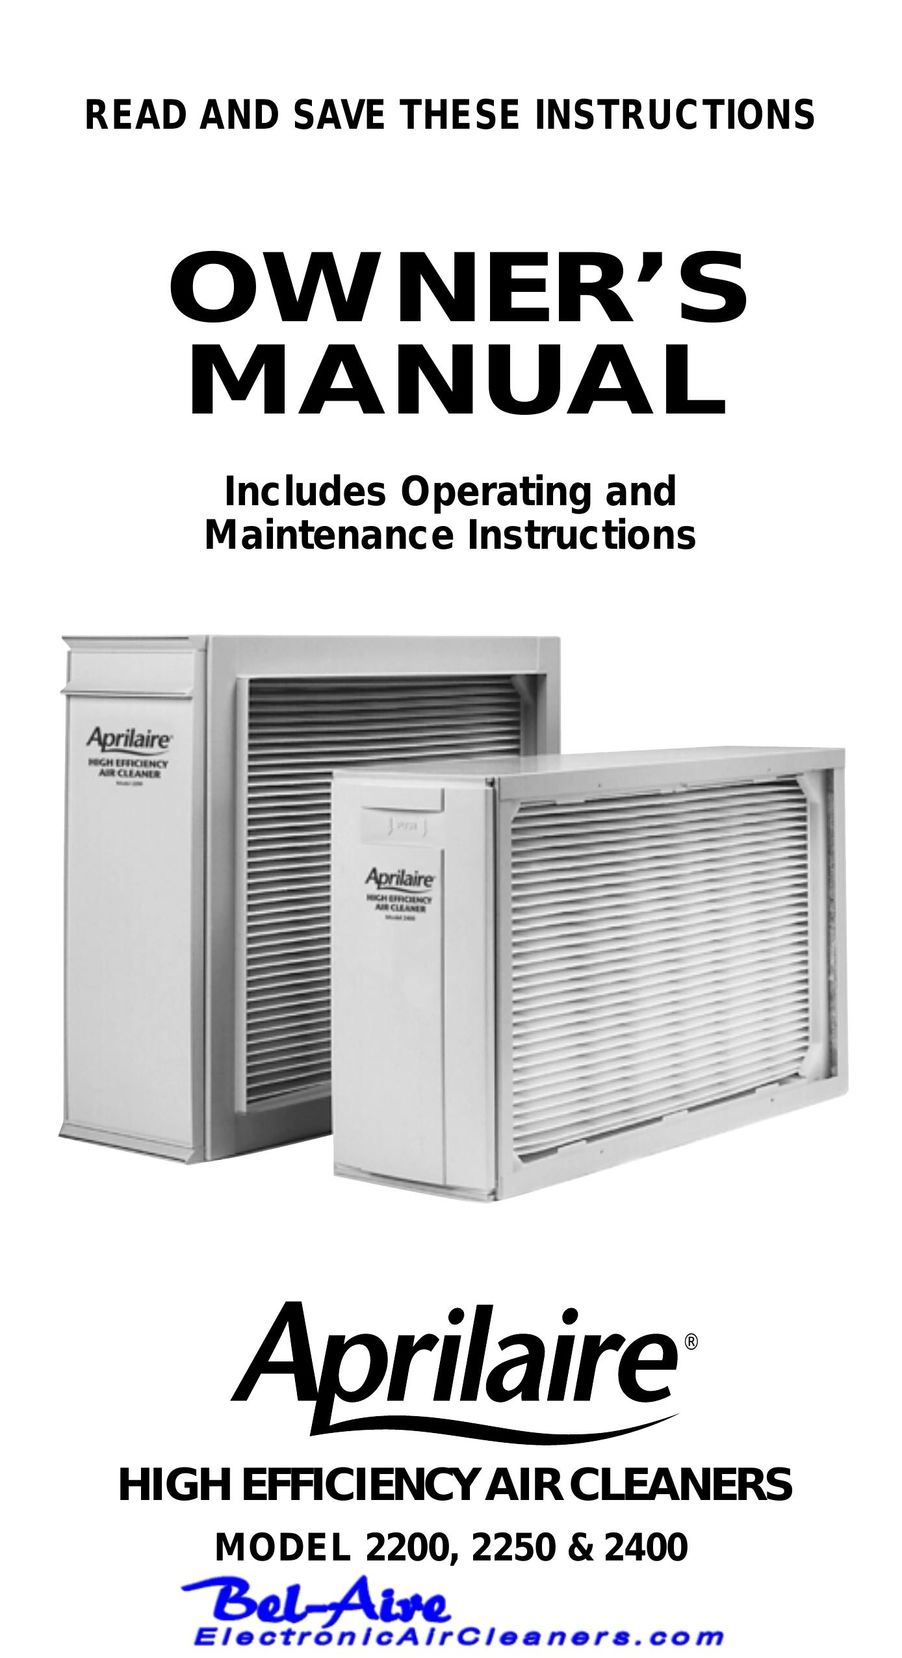 Aprilaire 2250 & 2400 Air Cleaner User Manual (Page 1)